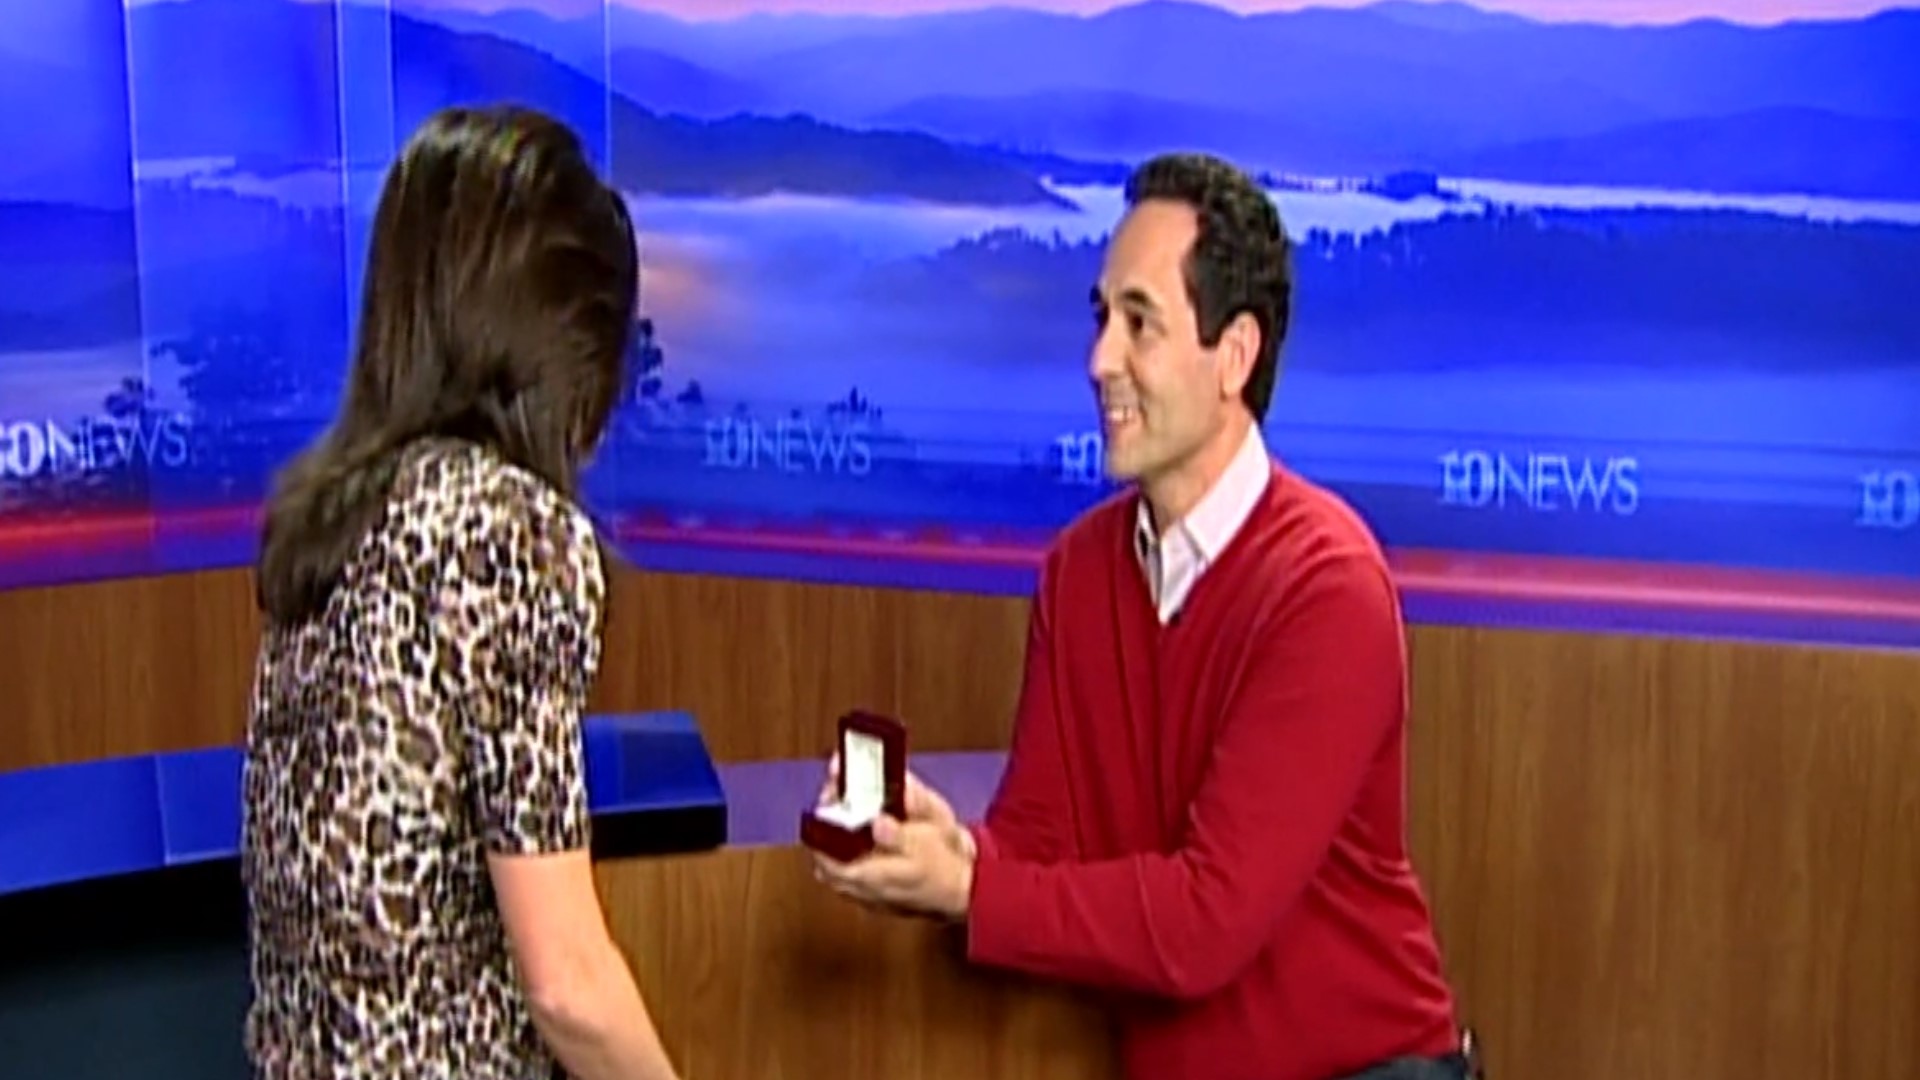 Former WBIR anchor Seth Grossman decided to pop the question in a spectacular way in 2013 while Beth was recording a taping for the evening newscast.